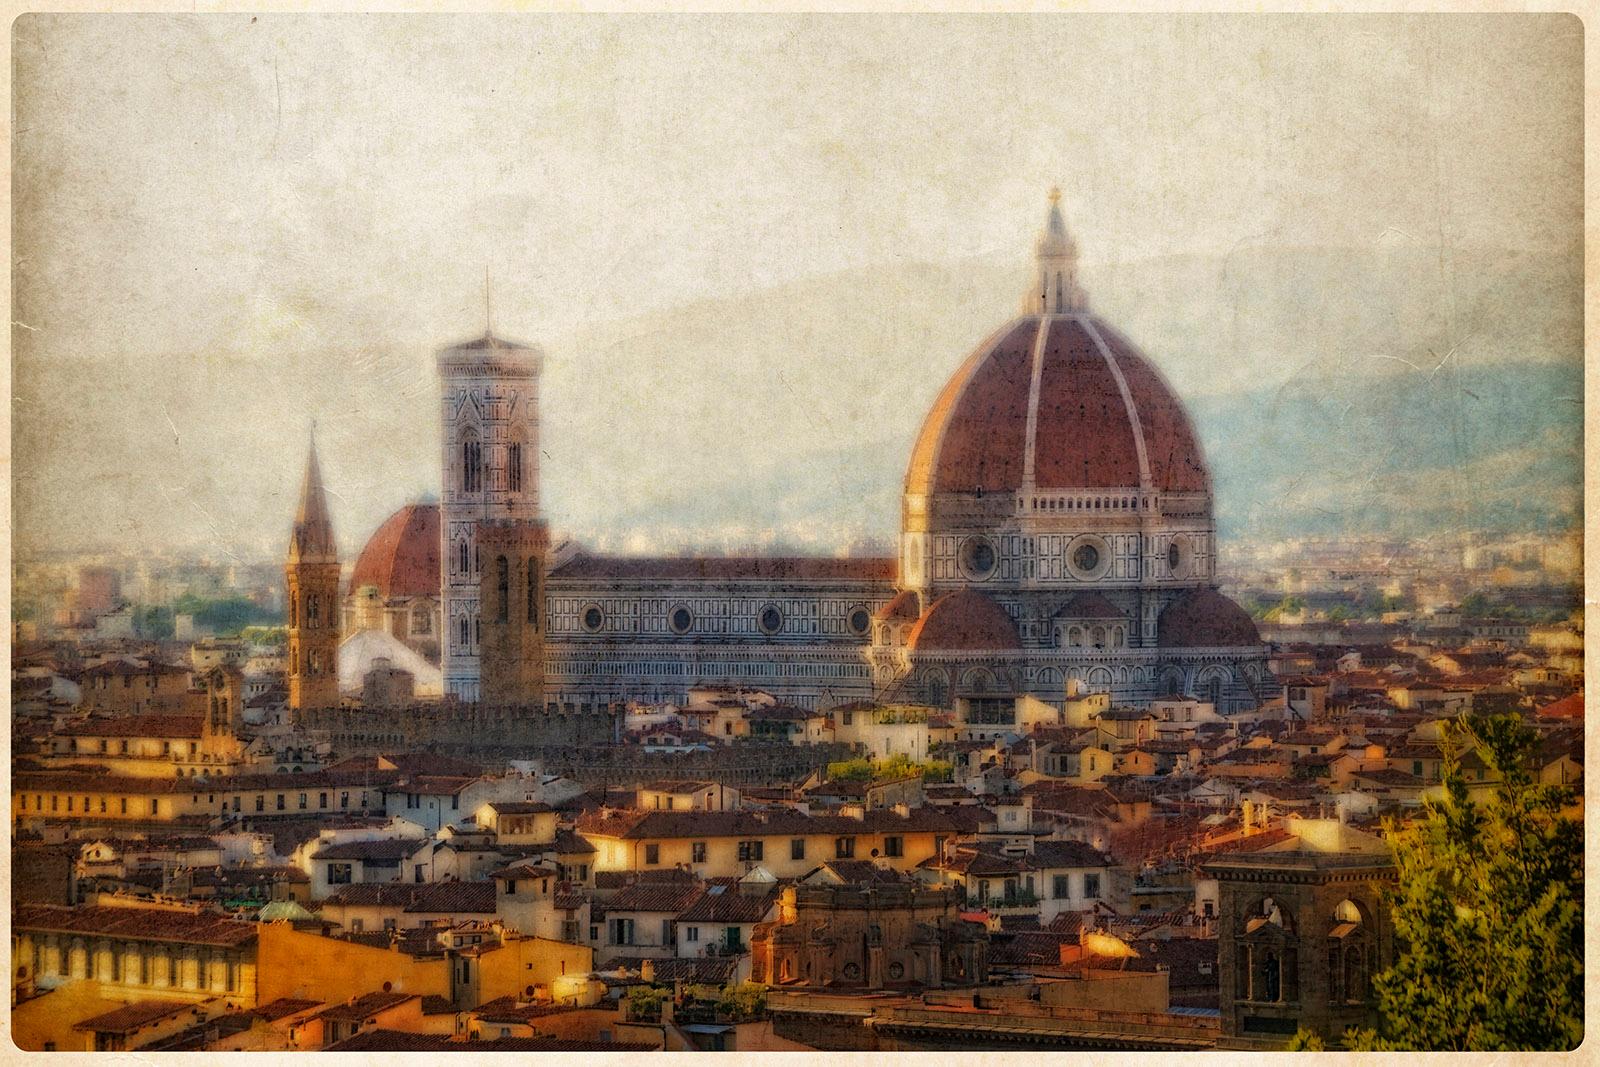 Italia 3 - Signed limited edition architectural print, Large format brown photo